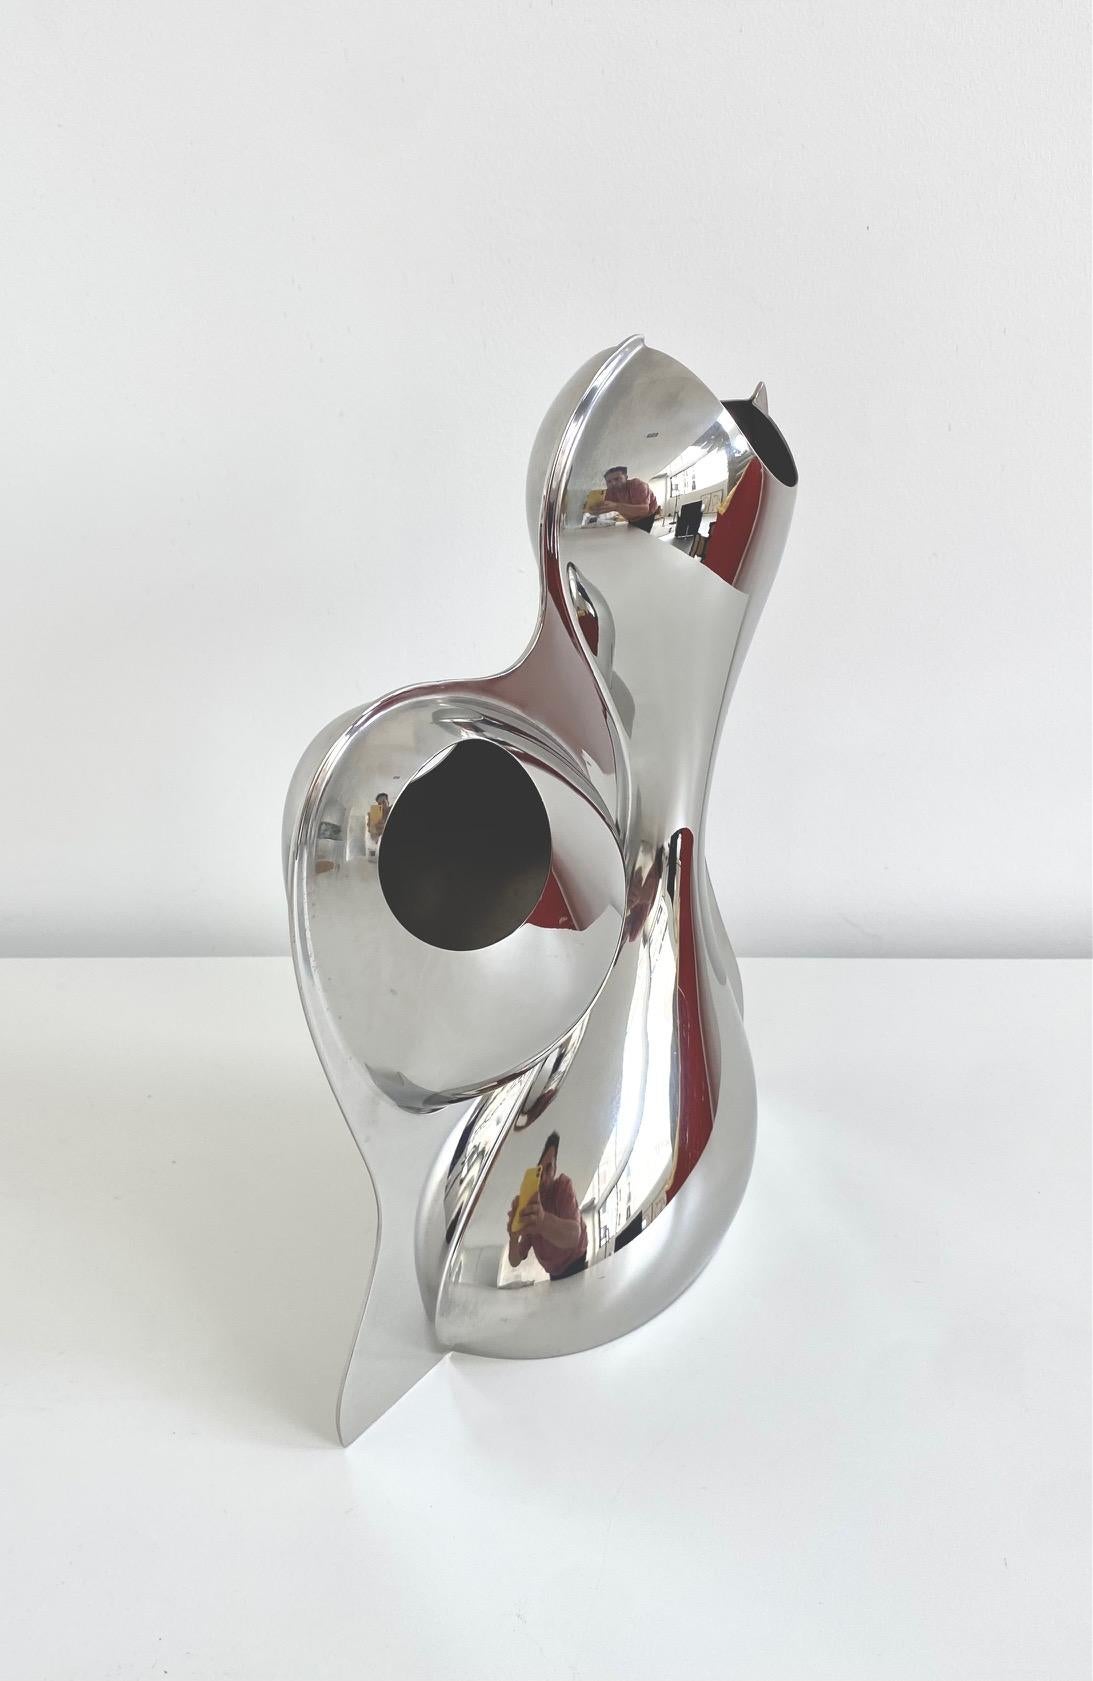 Iron Babyboop RA06 sculpture vase by Ron Arad - Alessi, 2002 For Sale